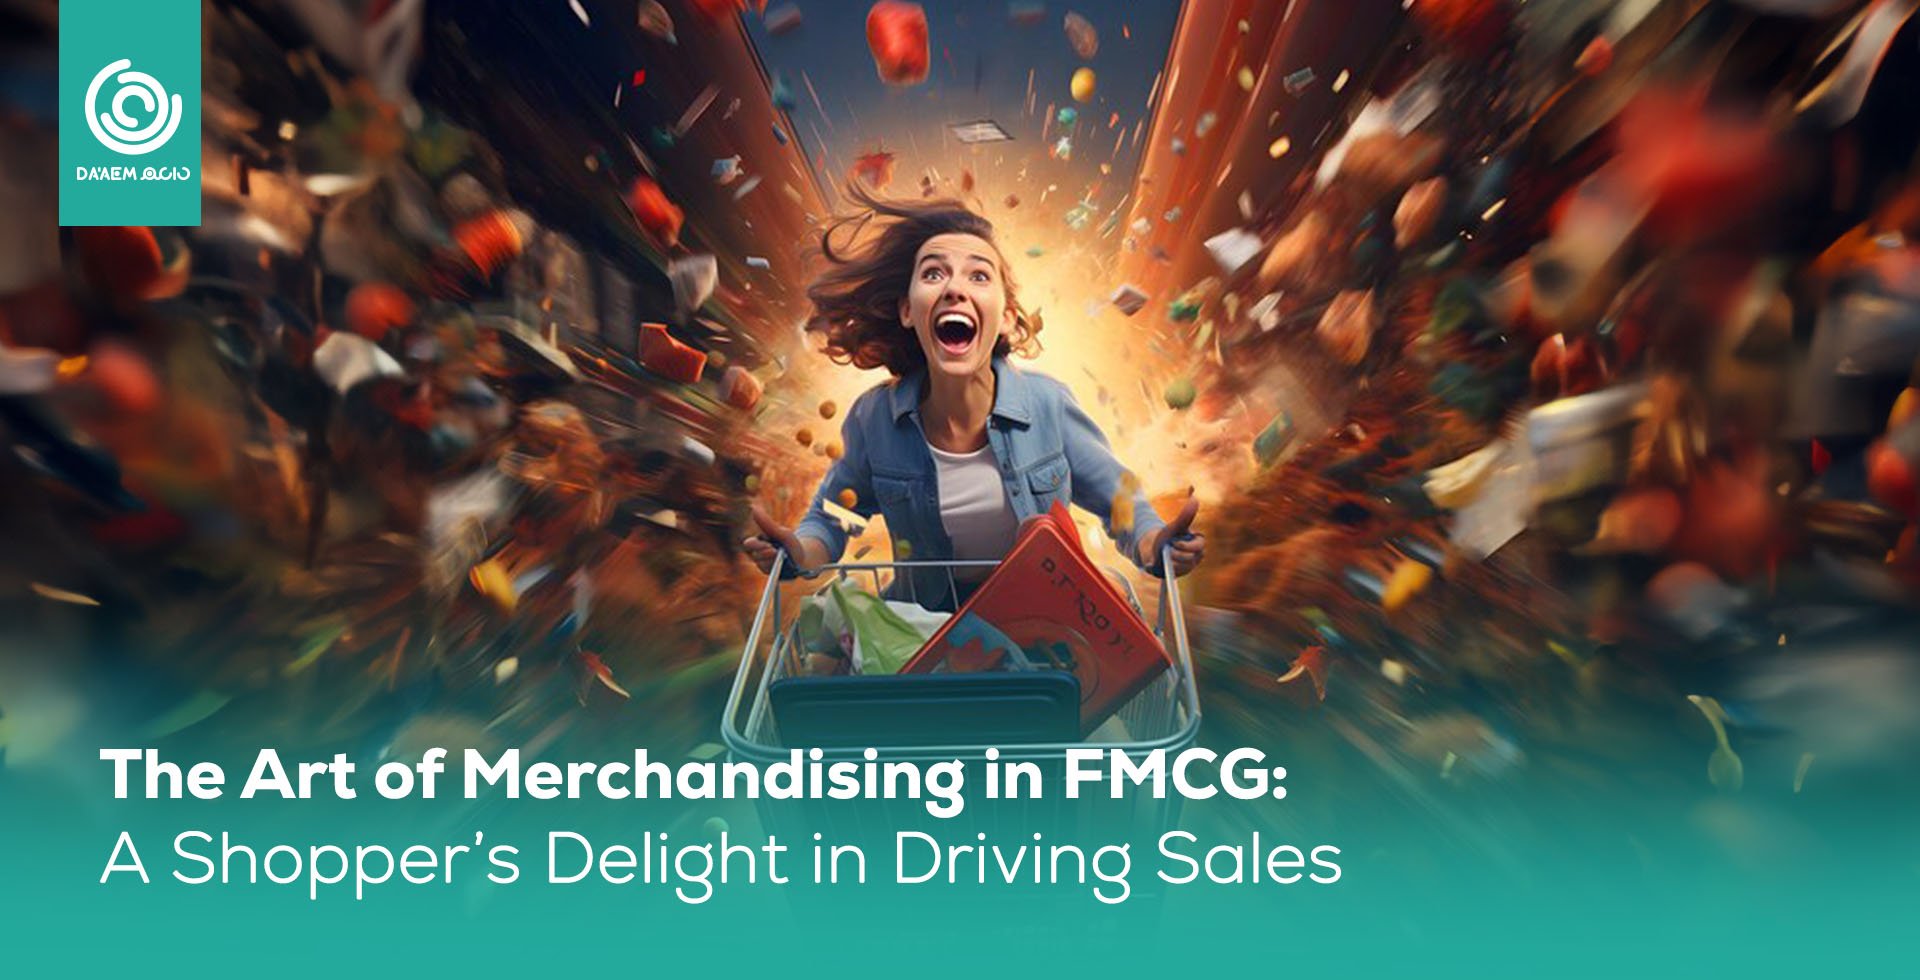 The Art of Merchandising in FMCG: A Shopper’s Delight in Driving Sales